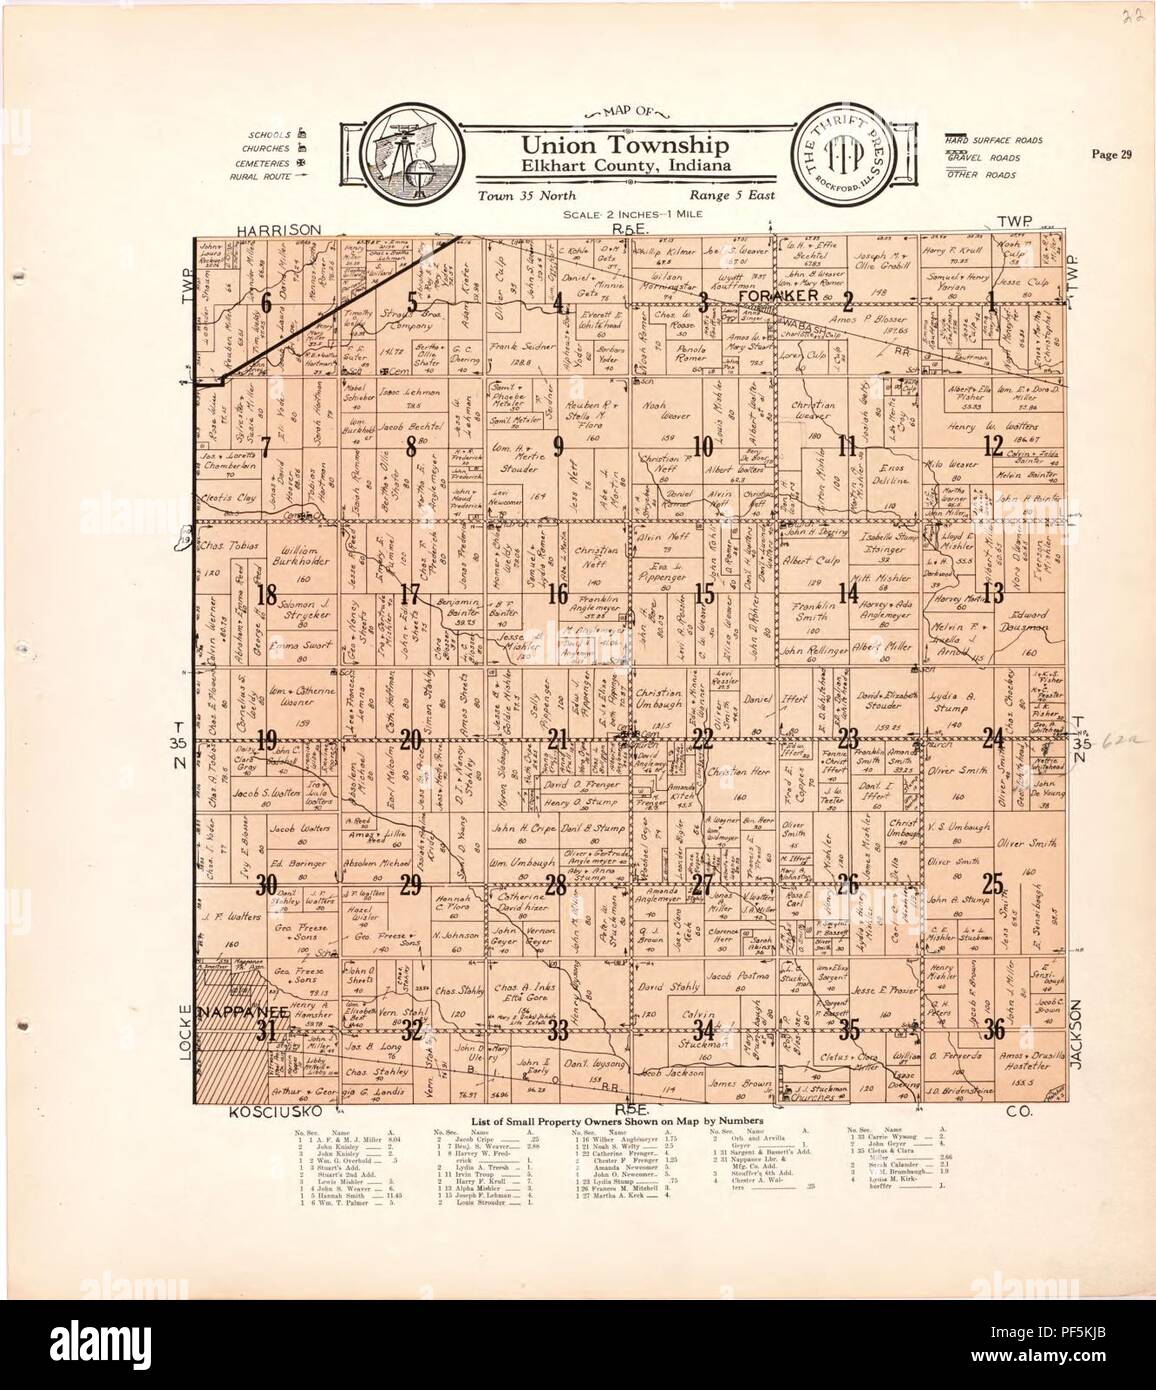 Atlas and plat book of Elkhart County, Indiana - compiled from surveys and the public records of Elkhart County, Indiana. Stock Photo